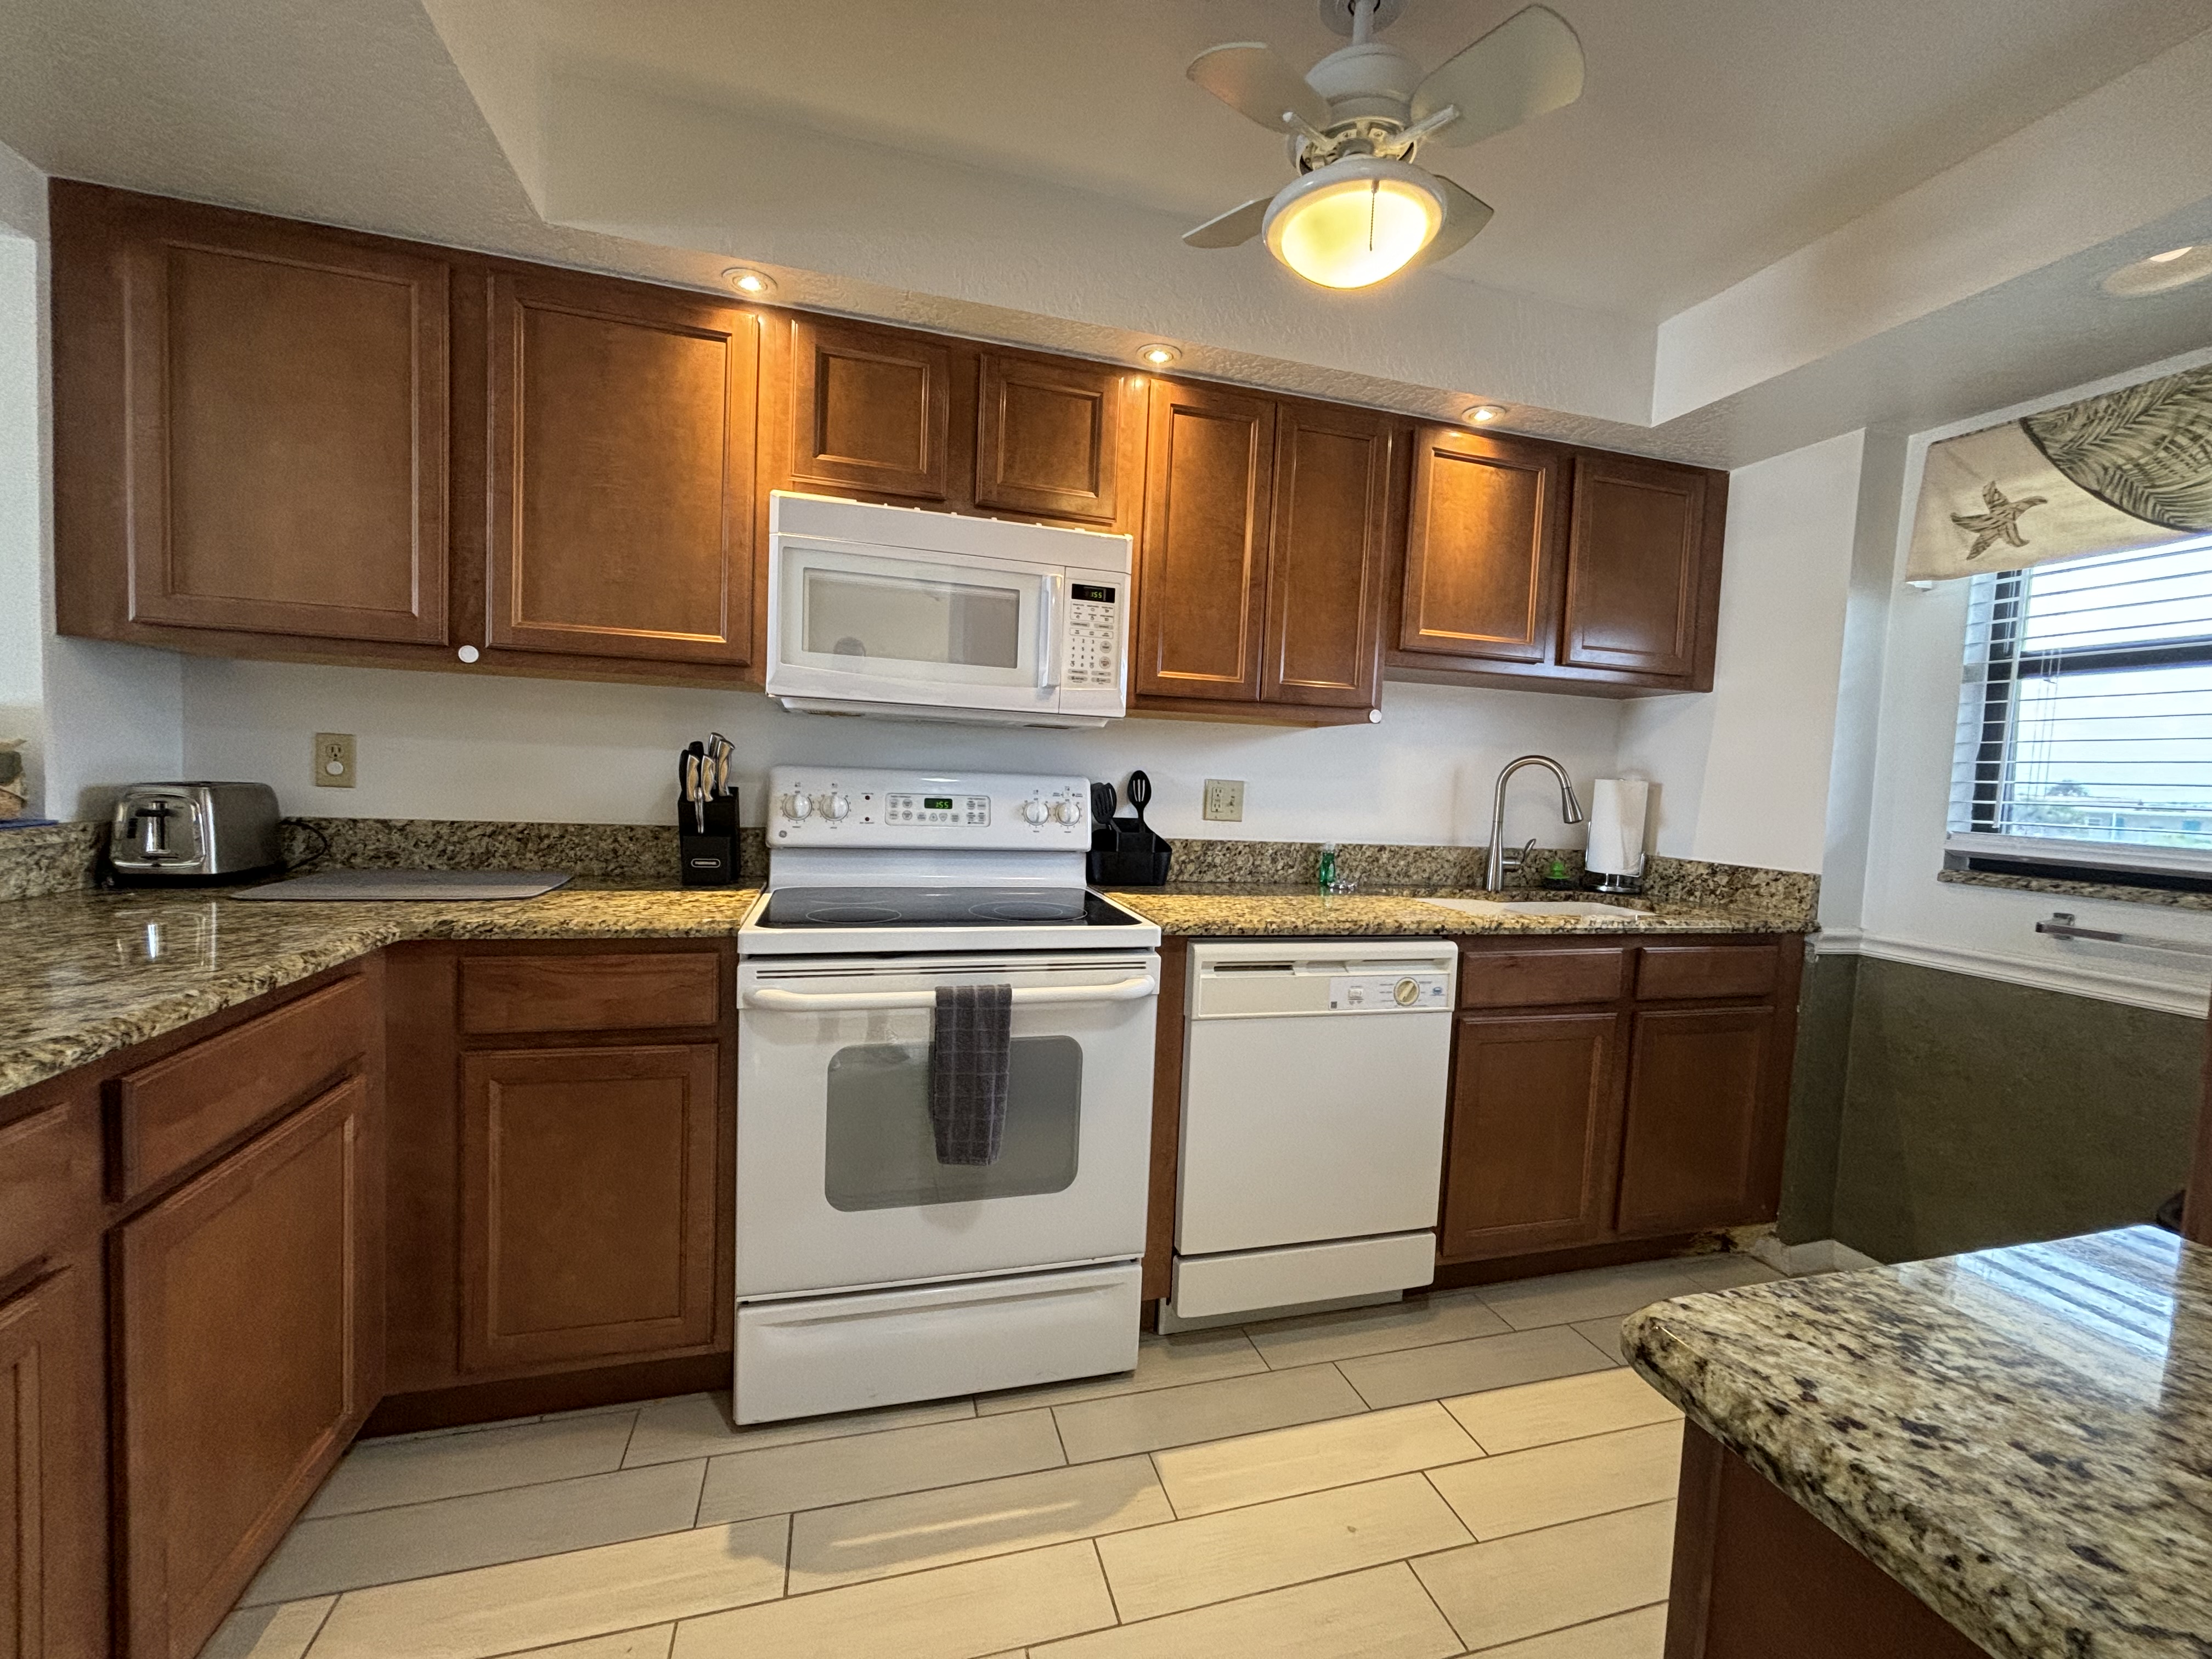 vacation rentals united states florida cape canaveral